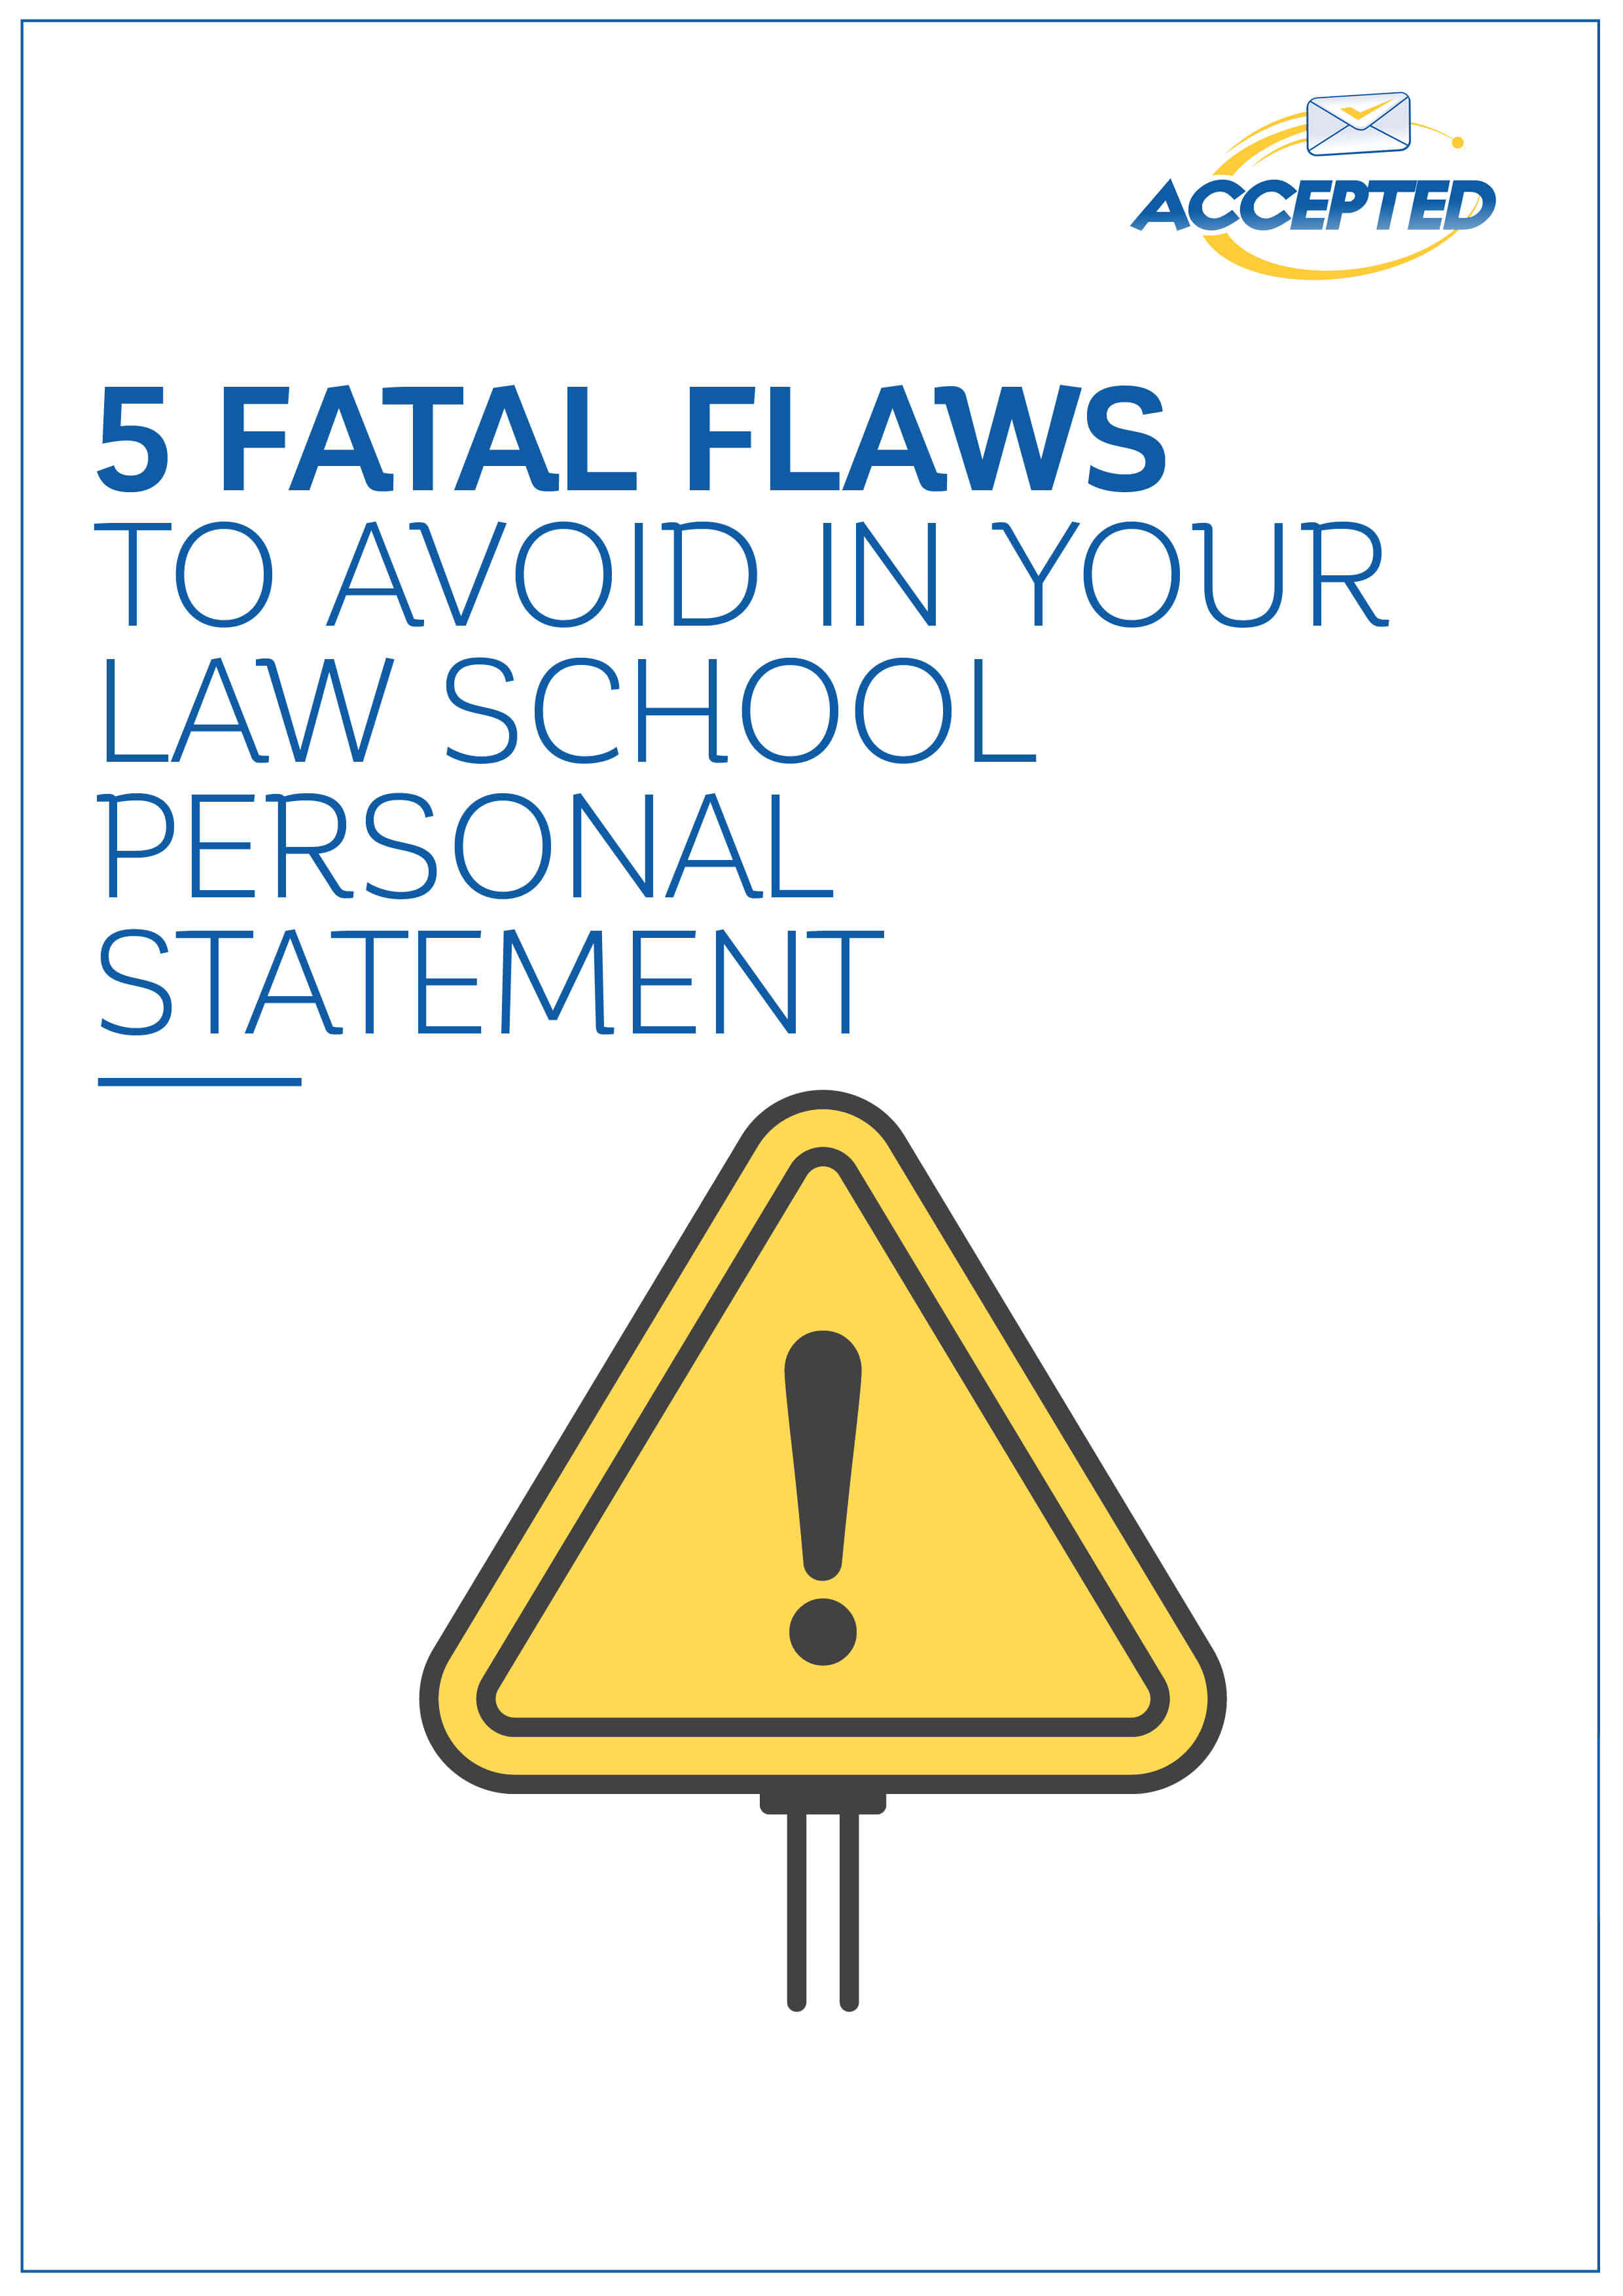 Five Fatal Flaws to Avoid In Your Law School Personal Statement